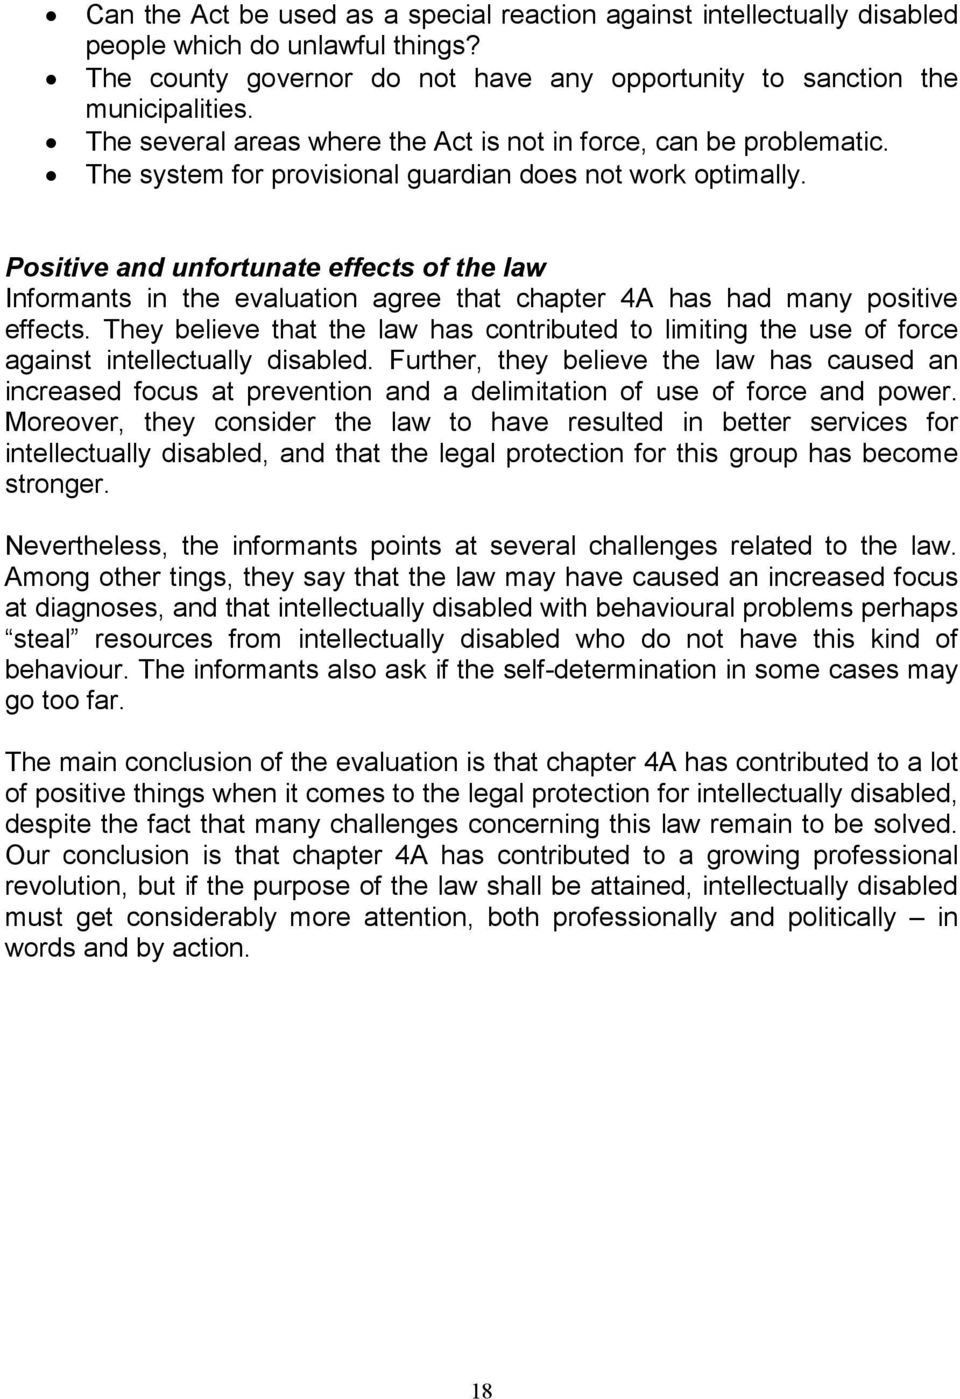 Positive and unfortunate effects of the law Informants in the evaluation agree that chapter 4A has had many positive effects.